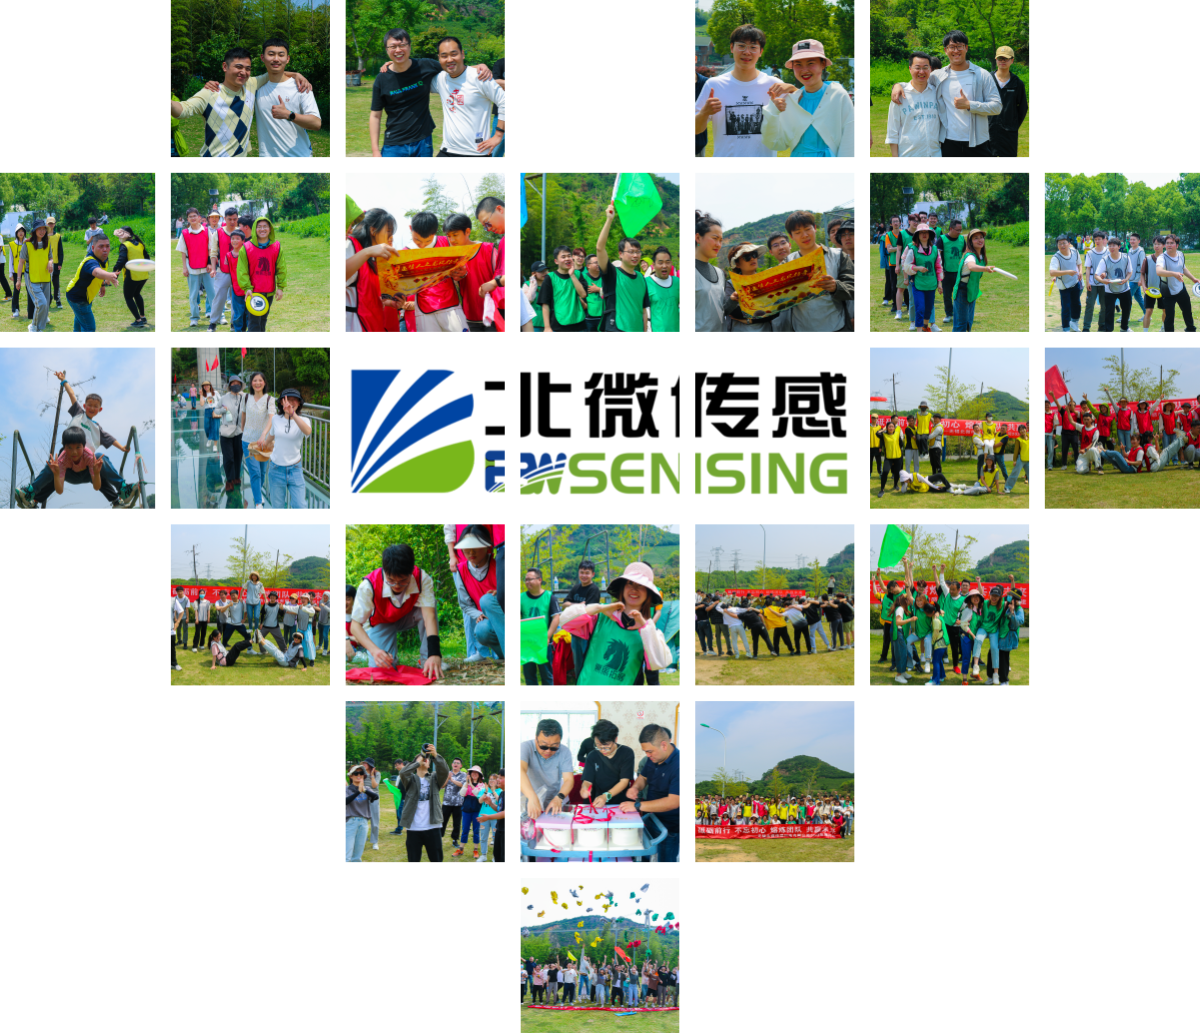 BWSENSING's team-building activity was held successfully in Changzhou